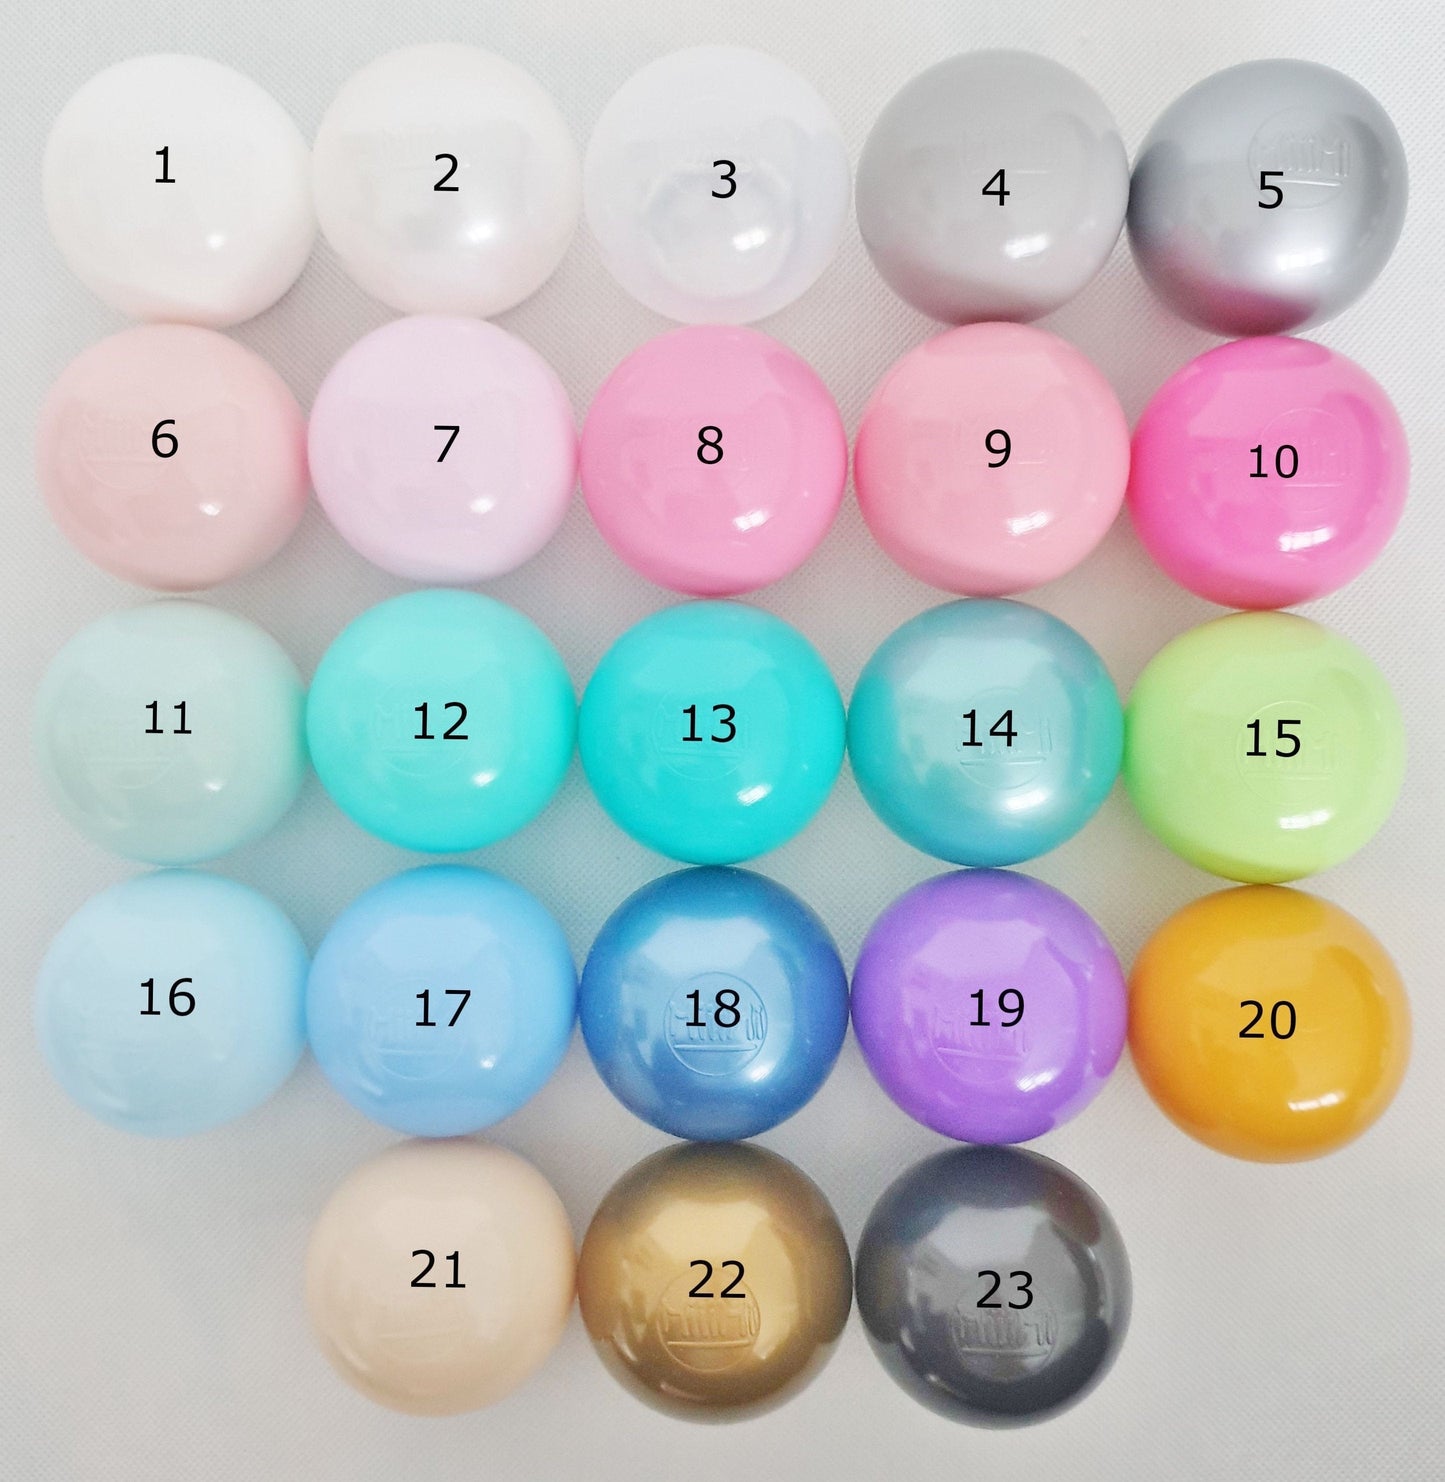 The Lust Living One – Beige Pit & 200 Balls